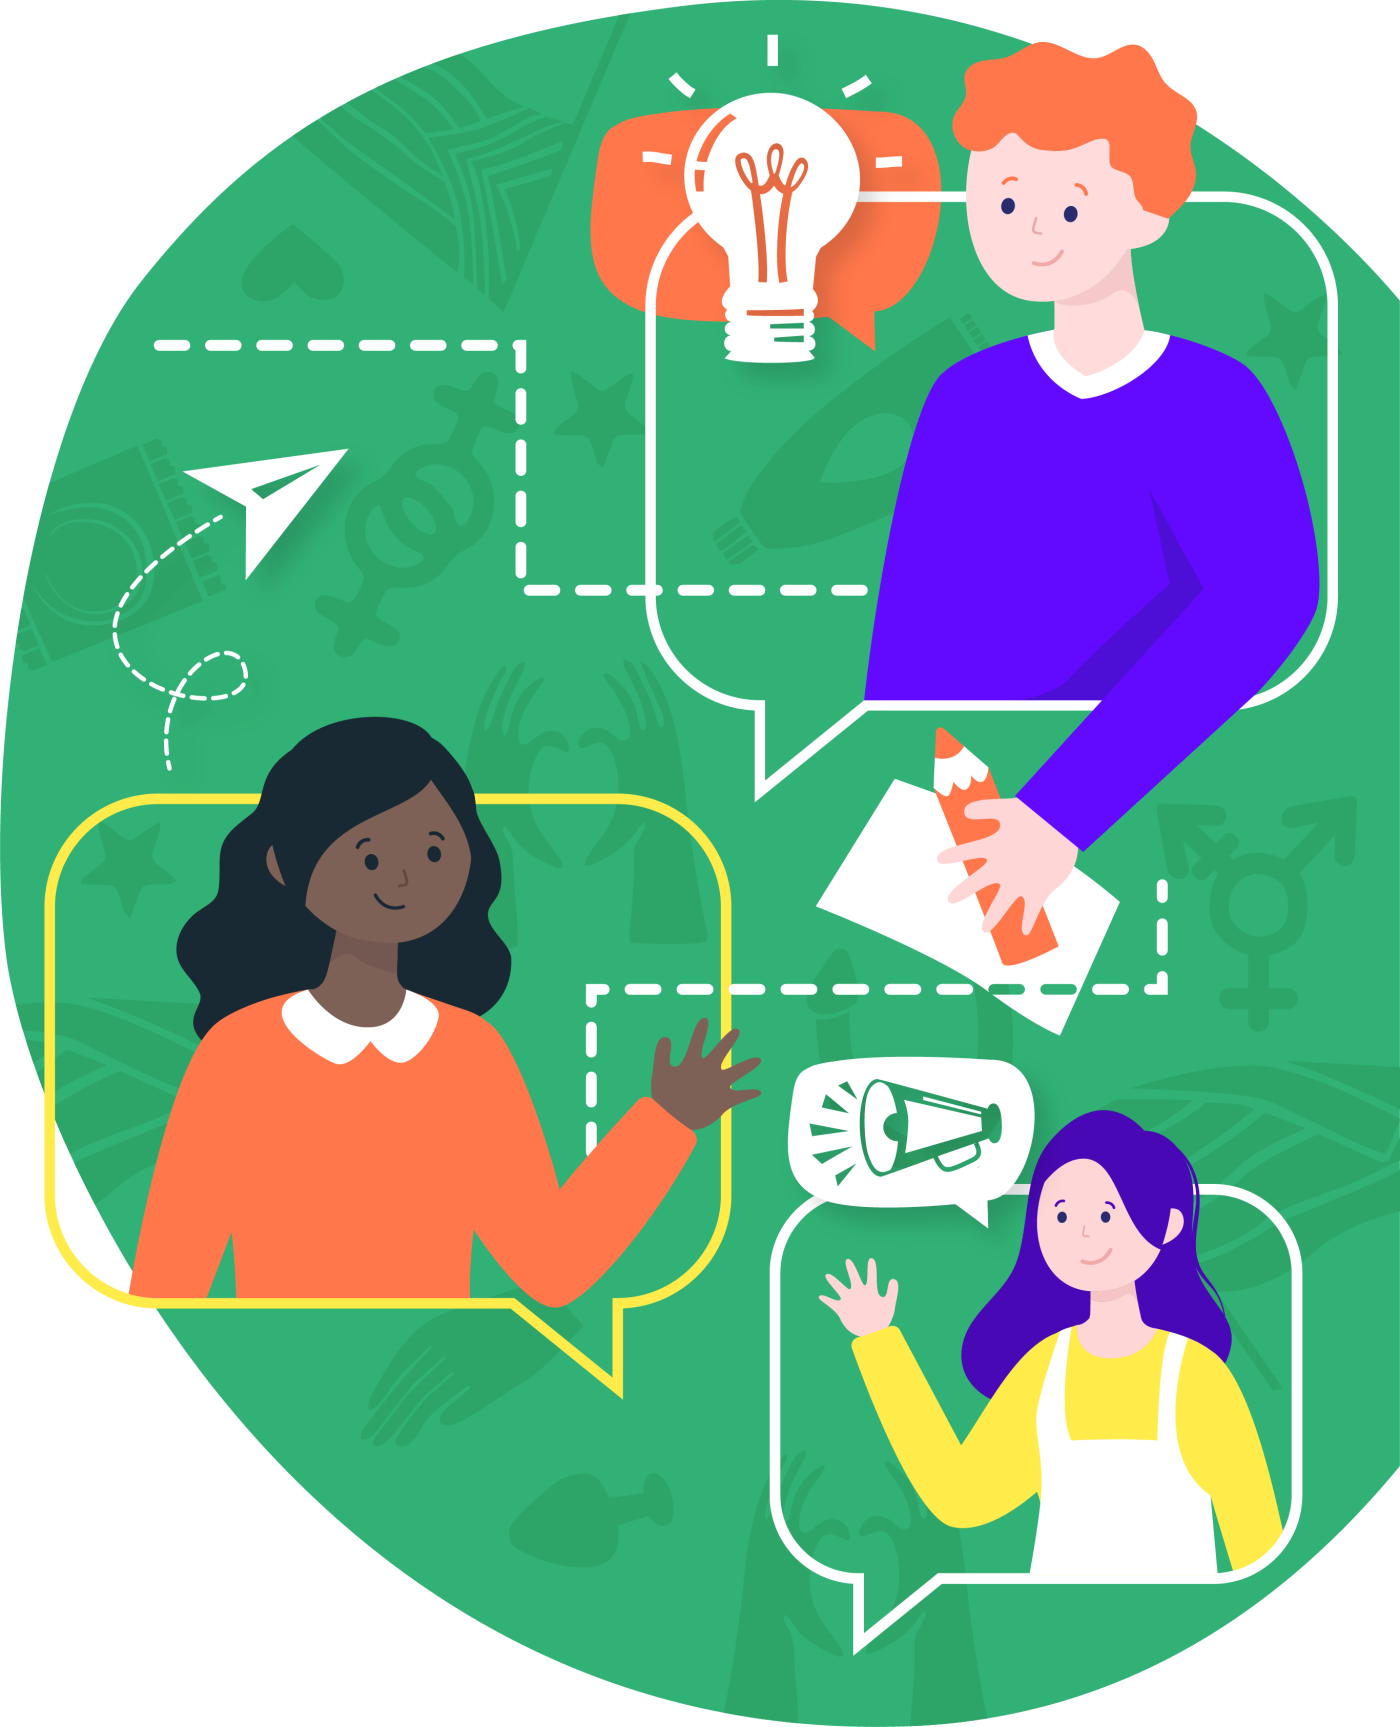 Three people communicate with each other and are connected with symbols of communication against a green background with a SRHR pattern.